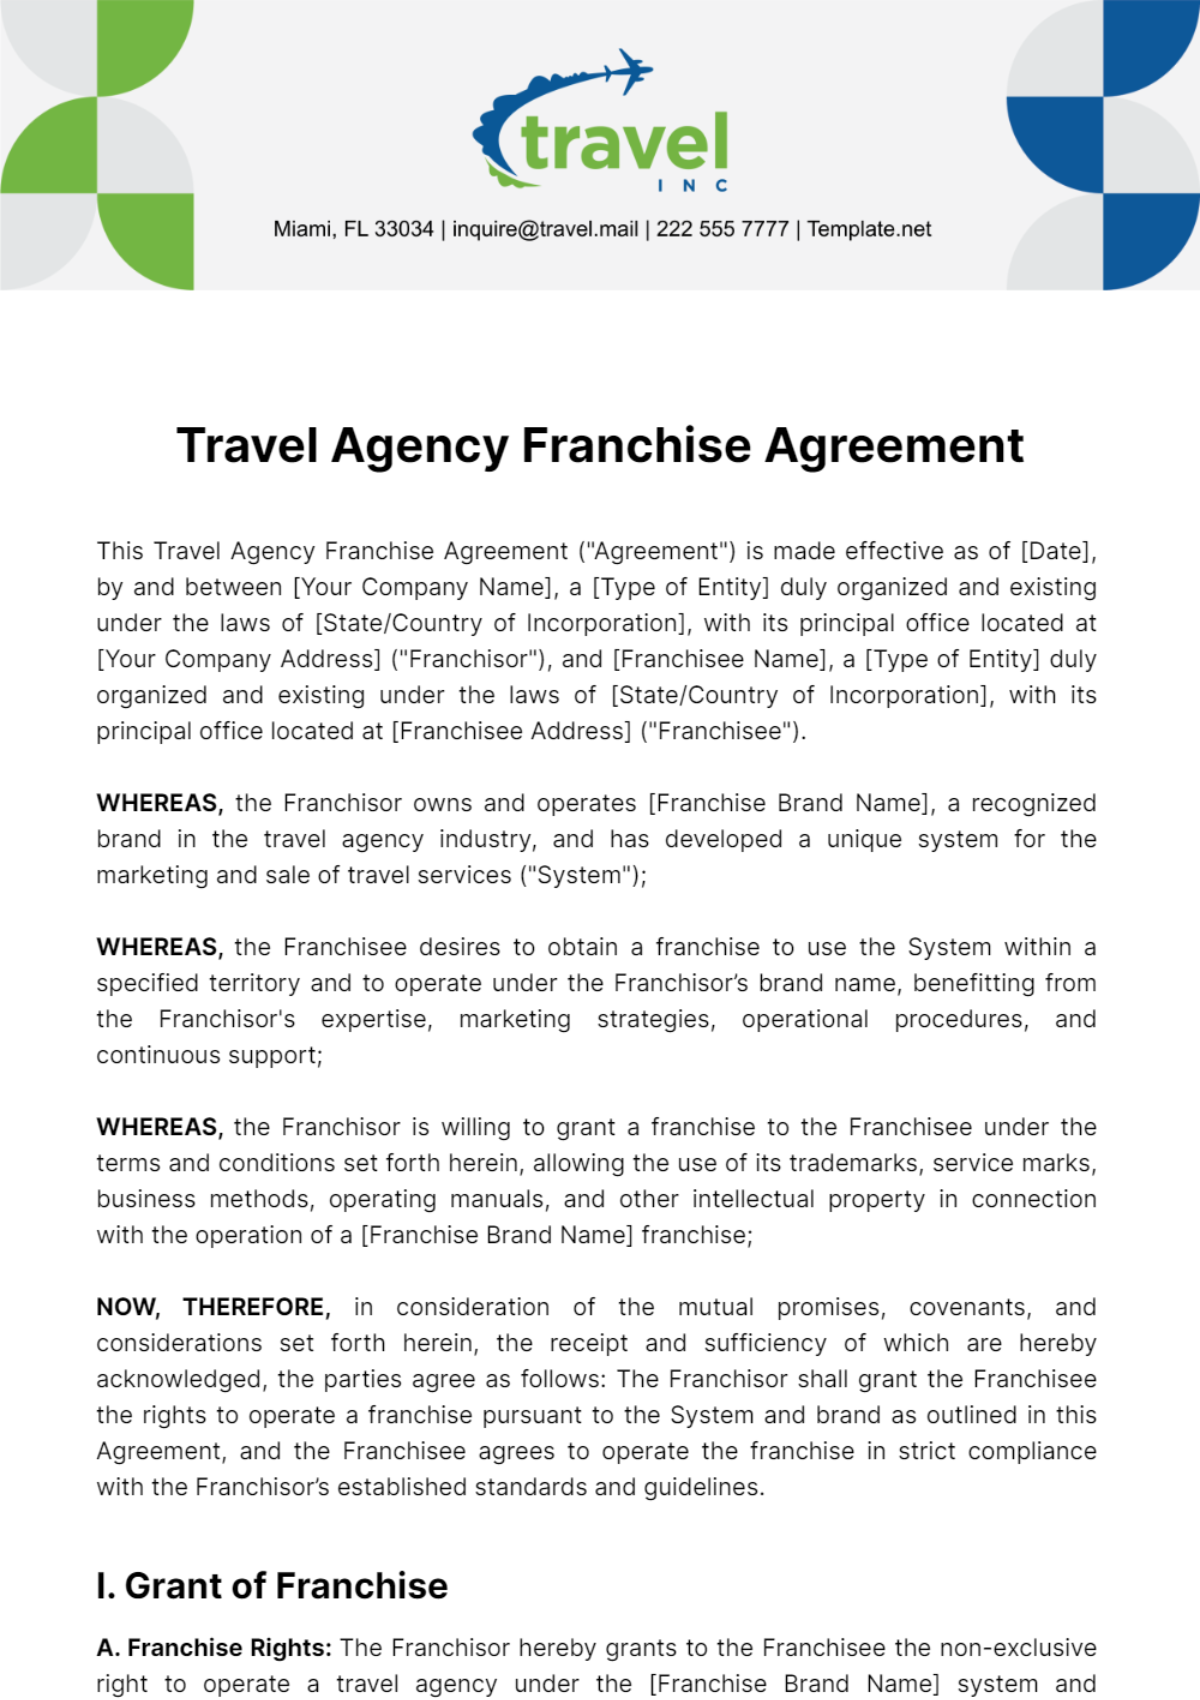 Free Travel Agency Franchise Agreement Template